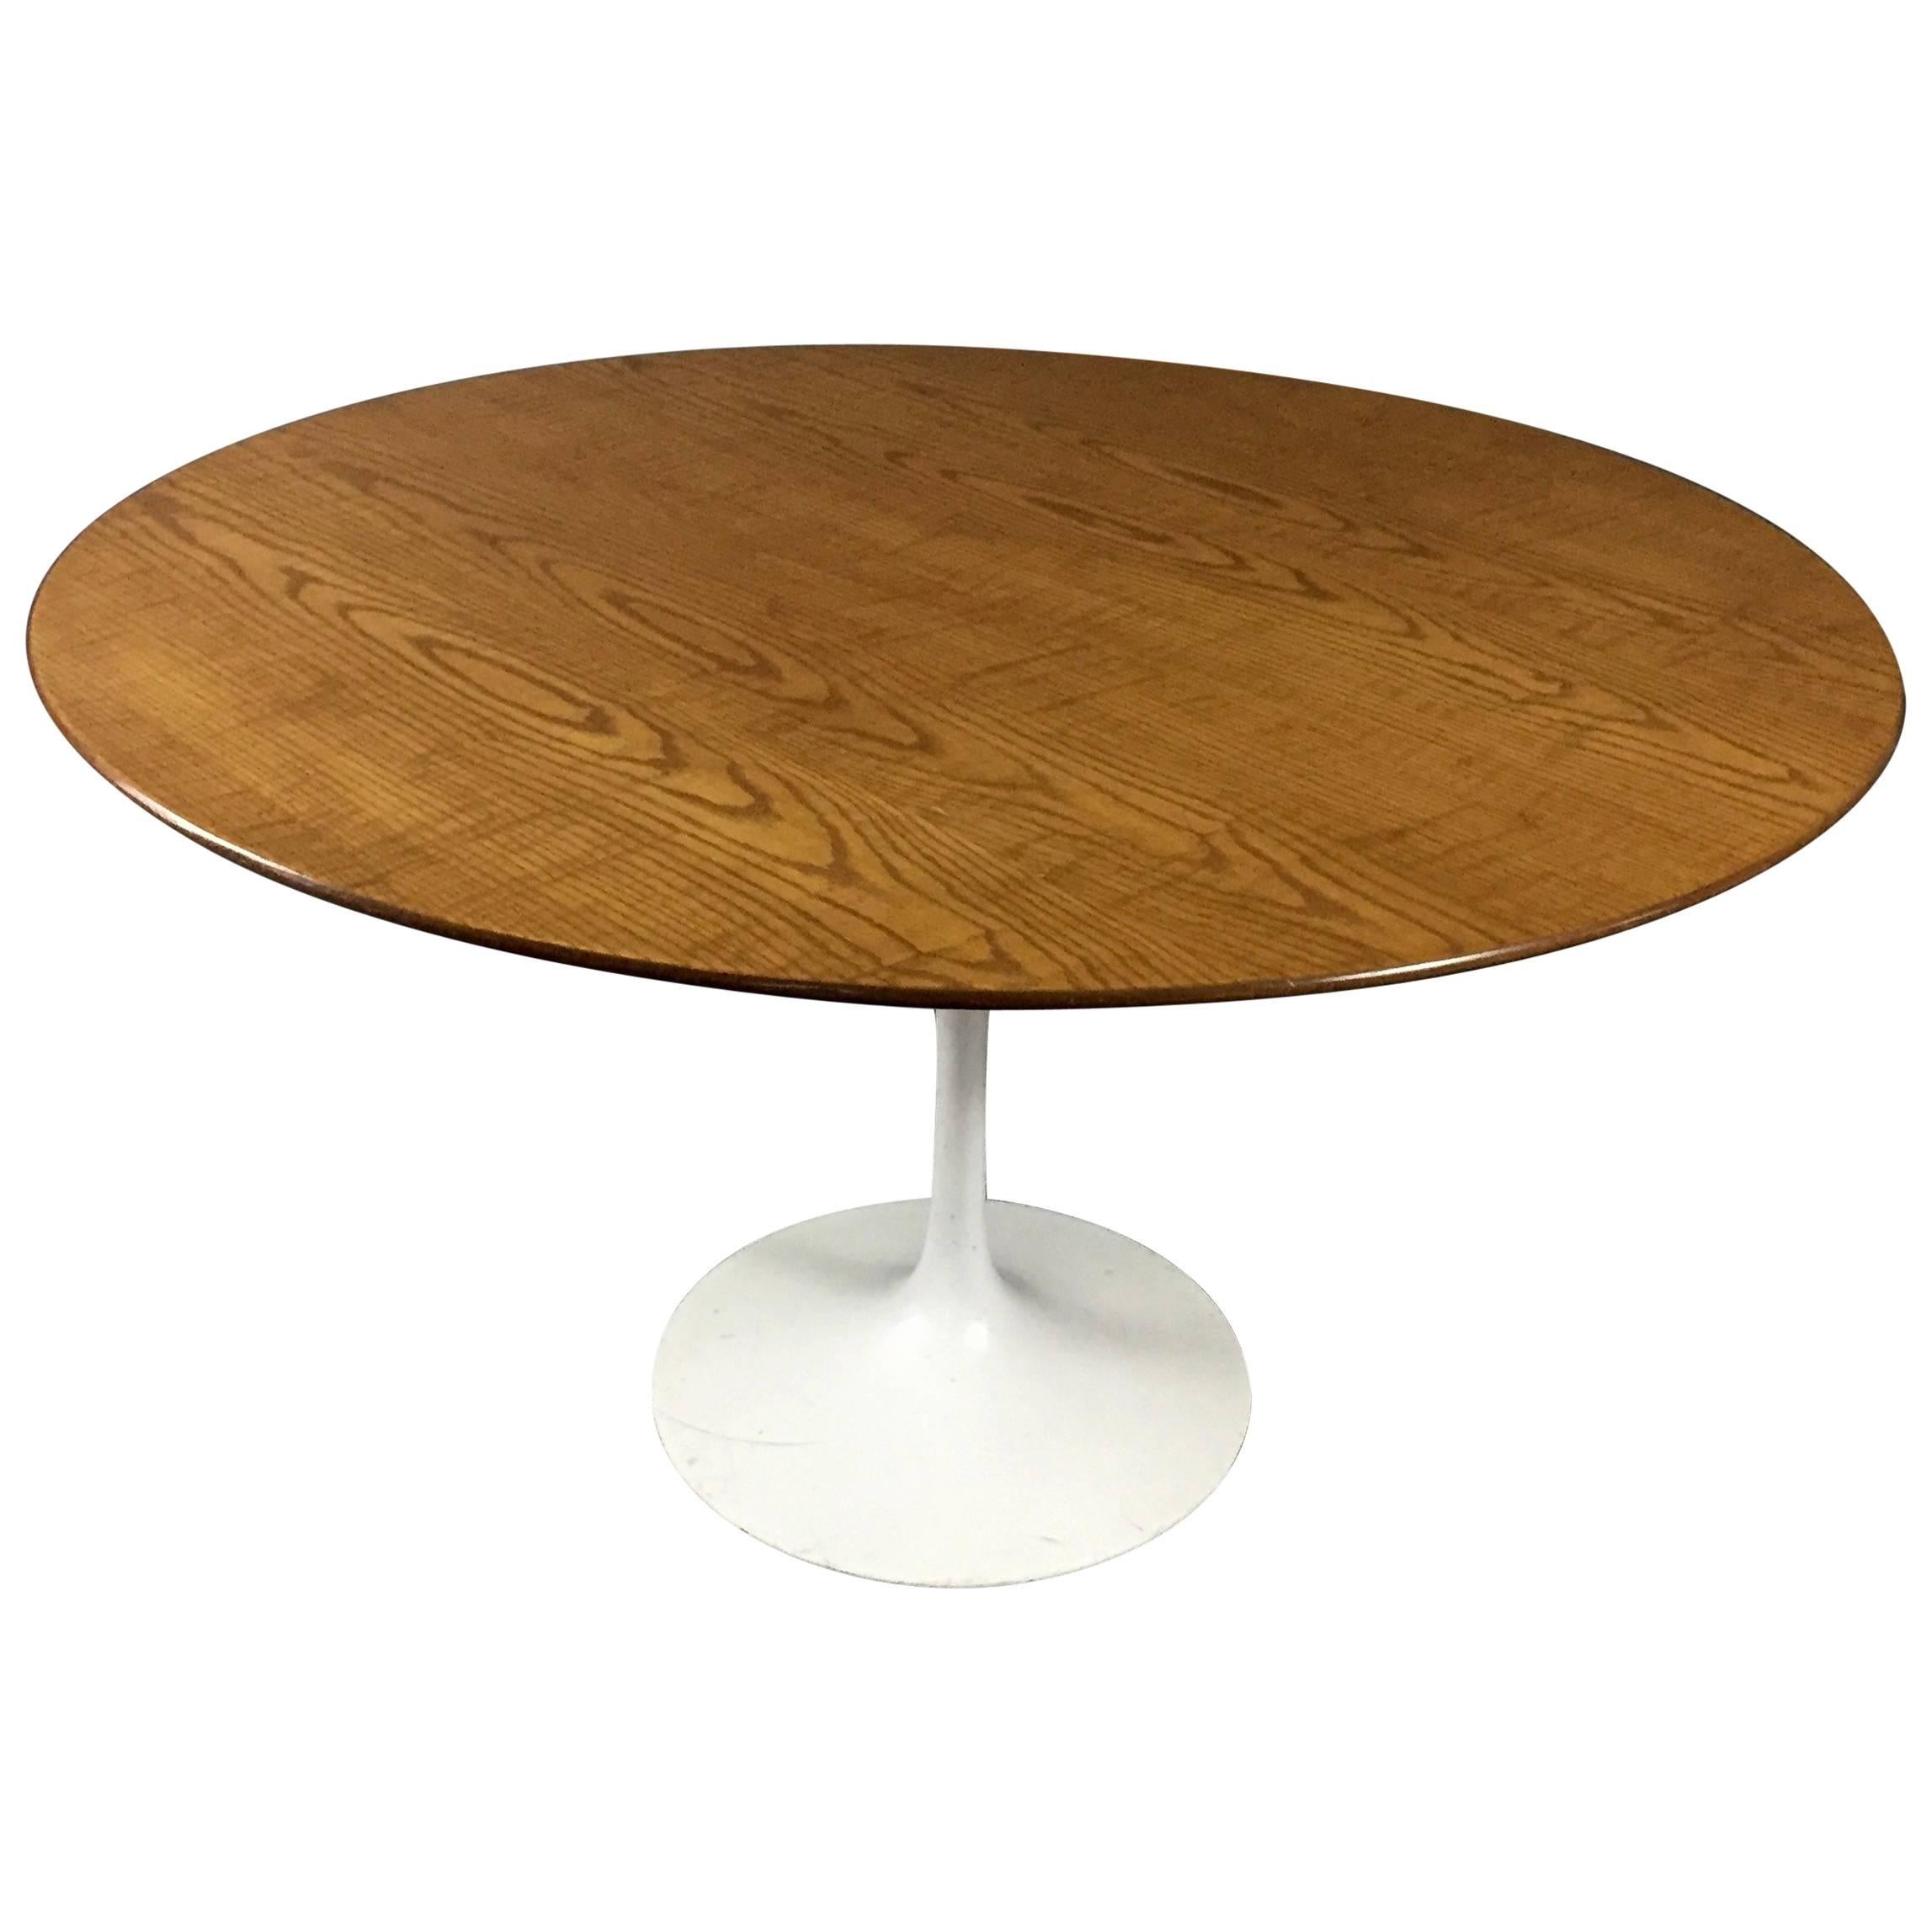 20th Century Oak Dining Table, Tulip Base For Sale